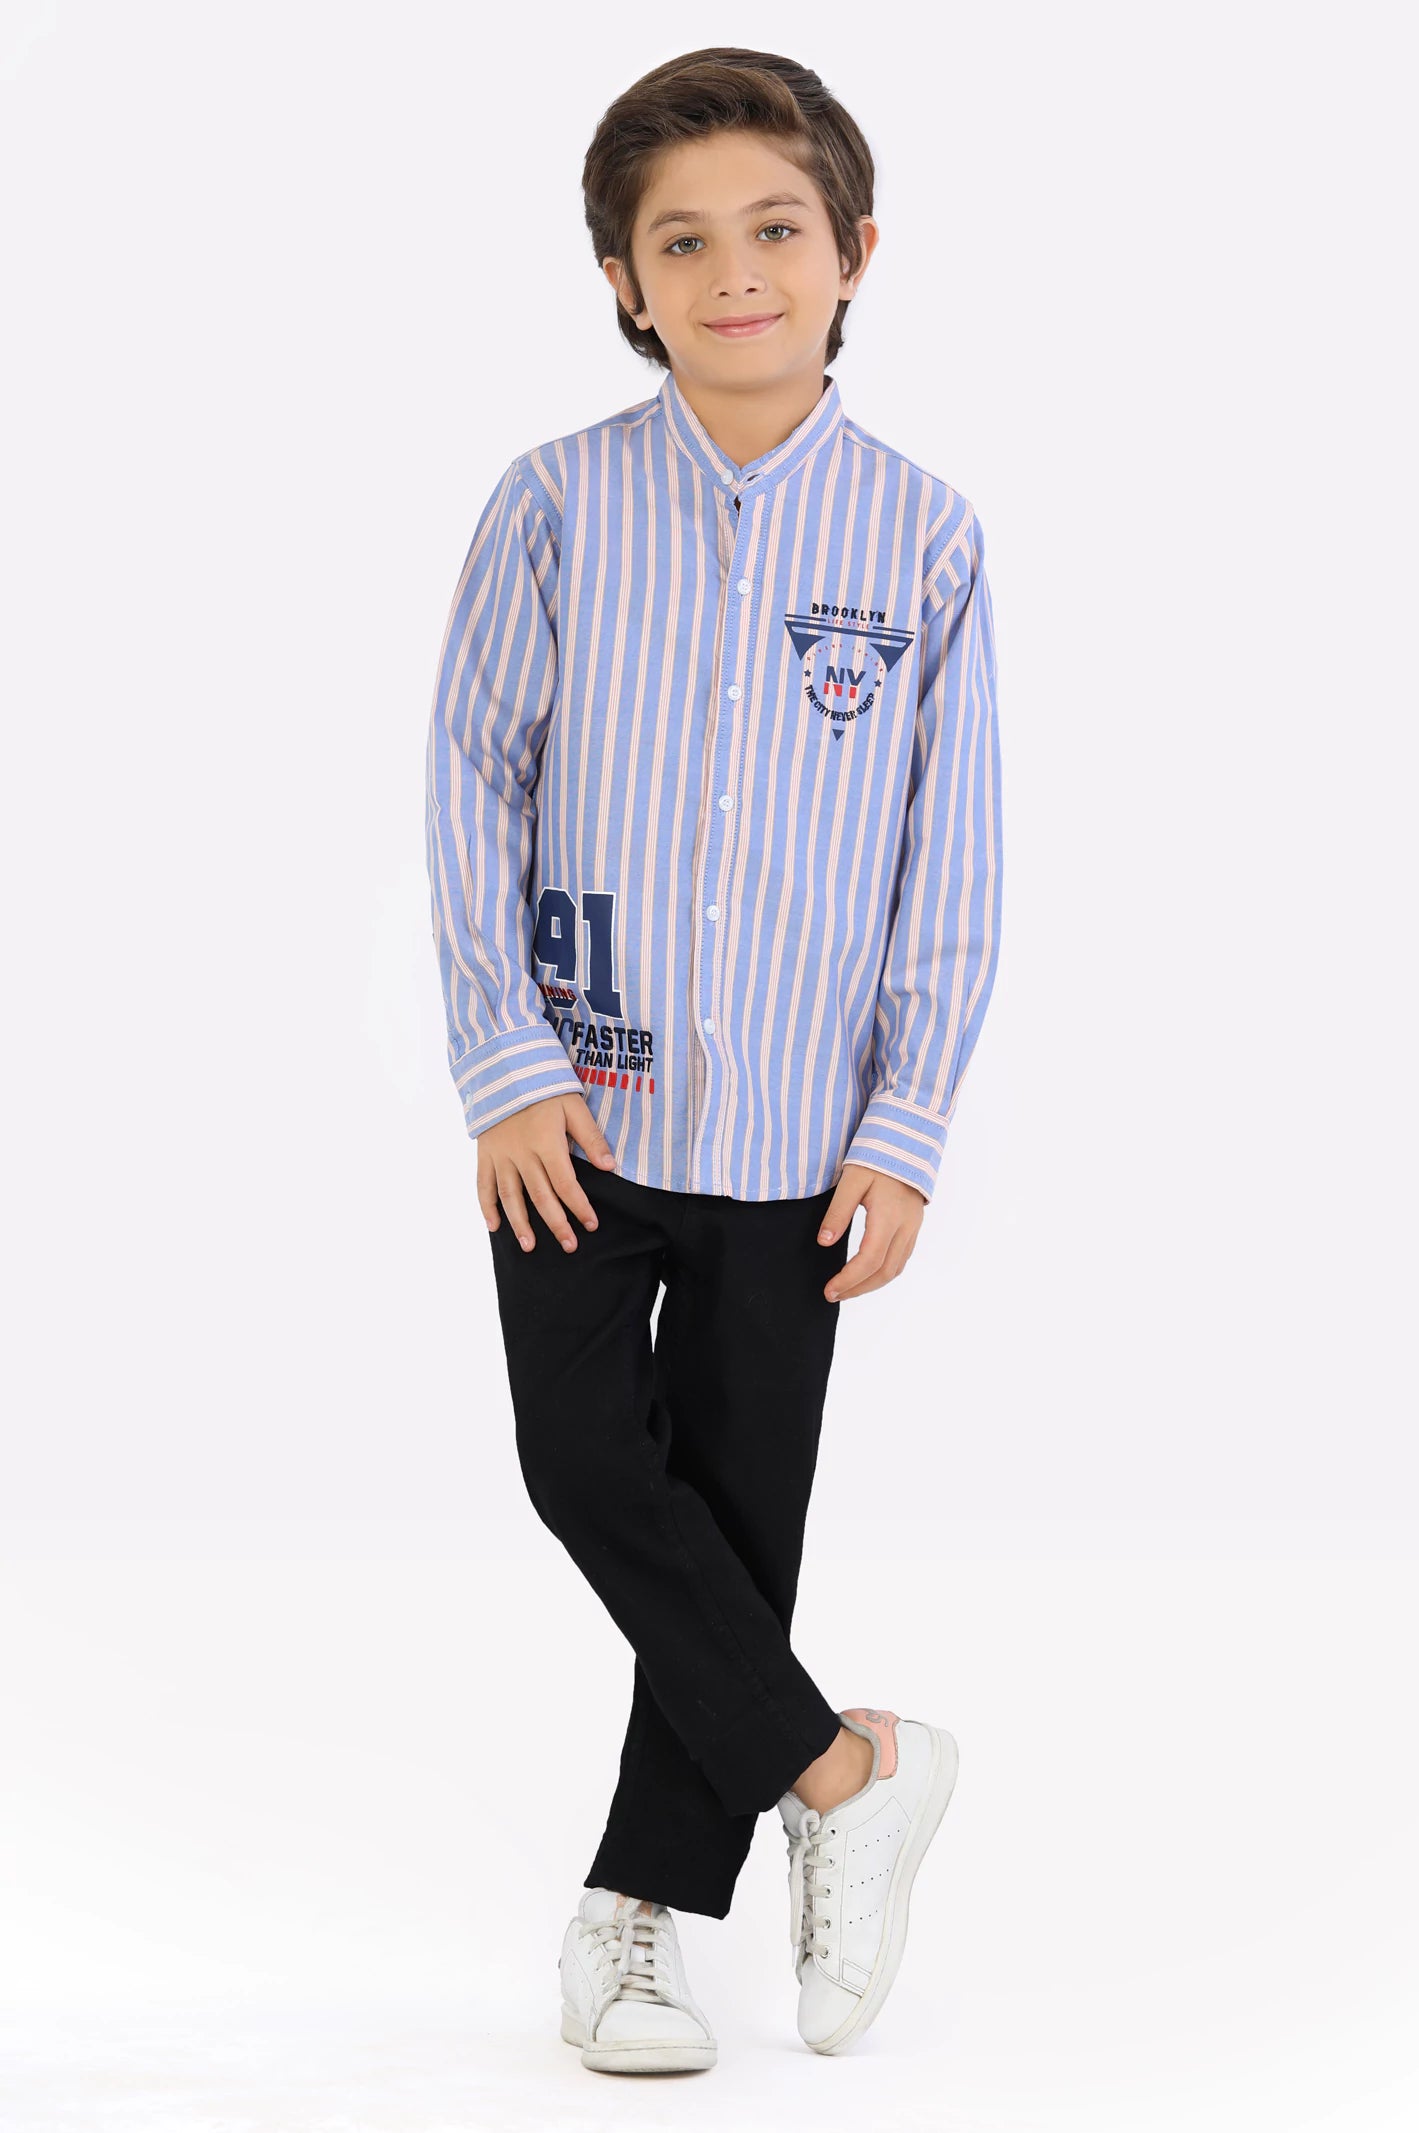 Royal Blue Awning Stripes Boys Shirt From Diners